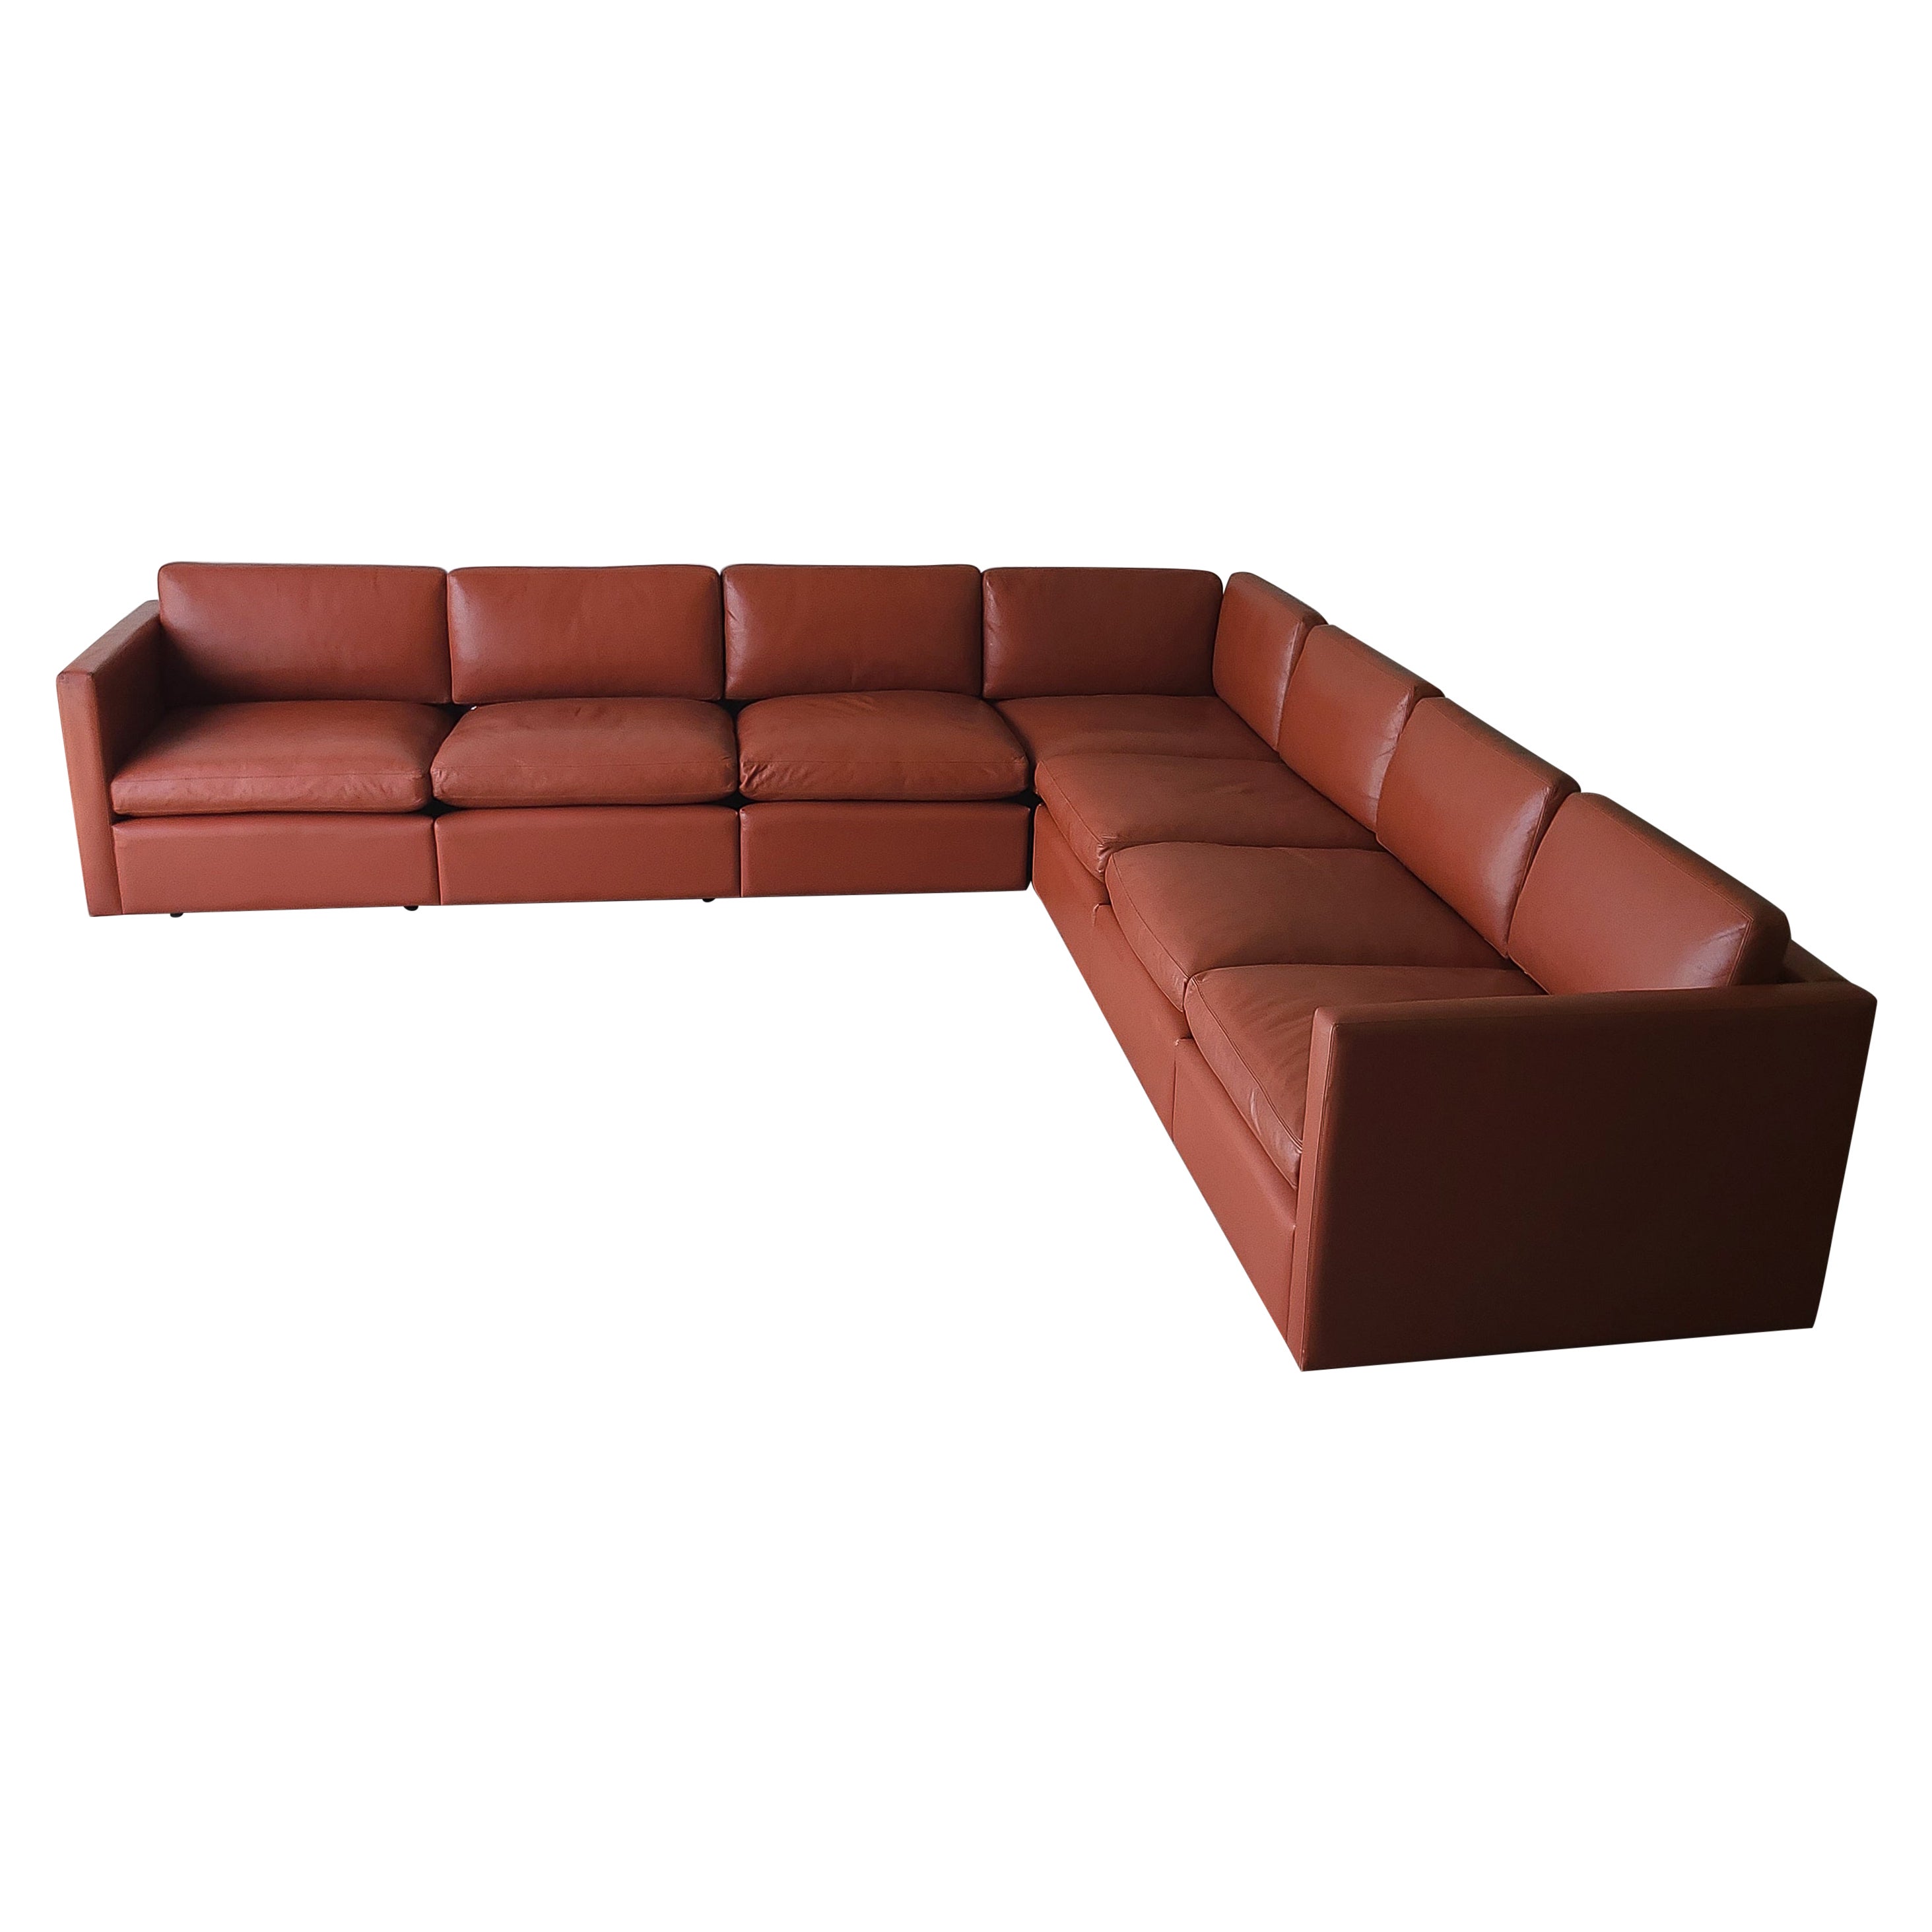 Charles Pfister for Knoll Leather Sectional Sofa